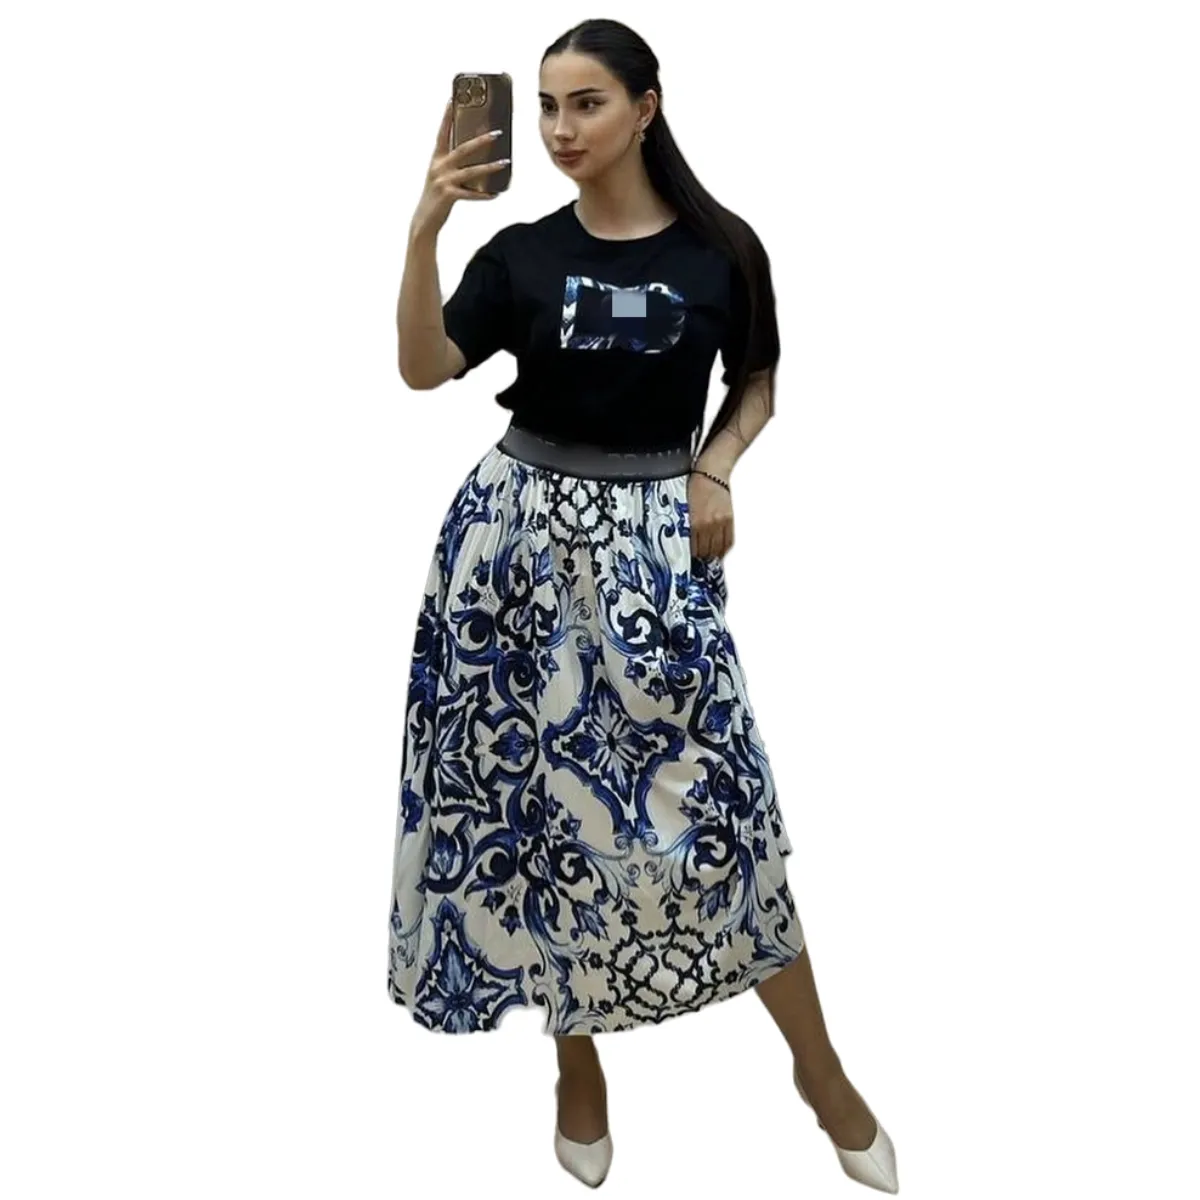 Designer Pleated Two Piece Dress Women Casual Short Sleeve T-shirt and Maxi Skirts Set Free Ship